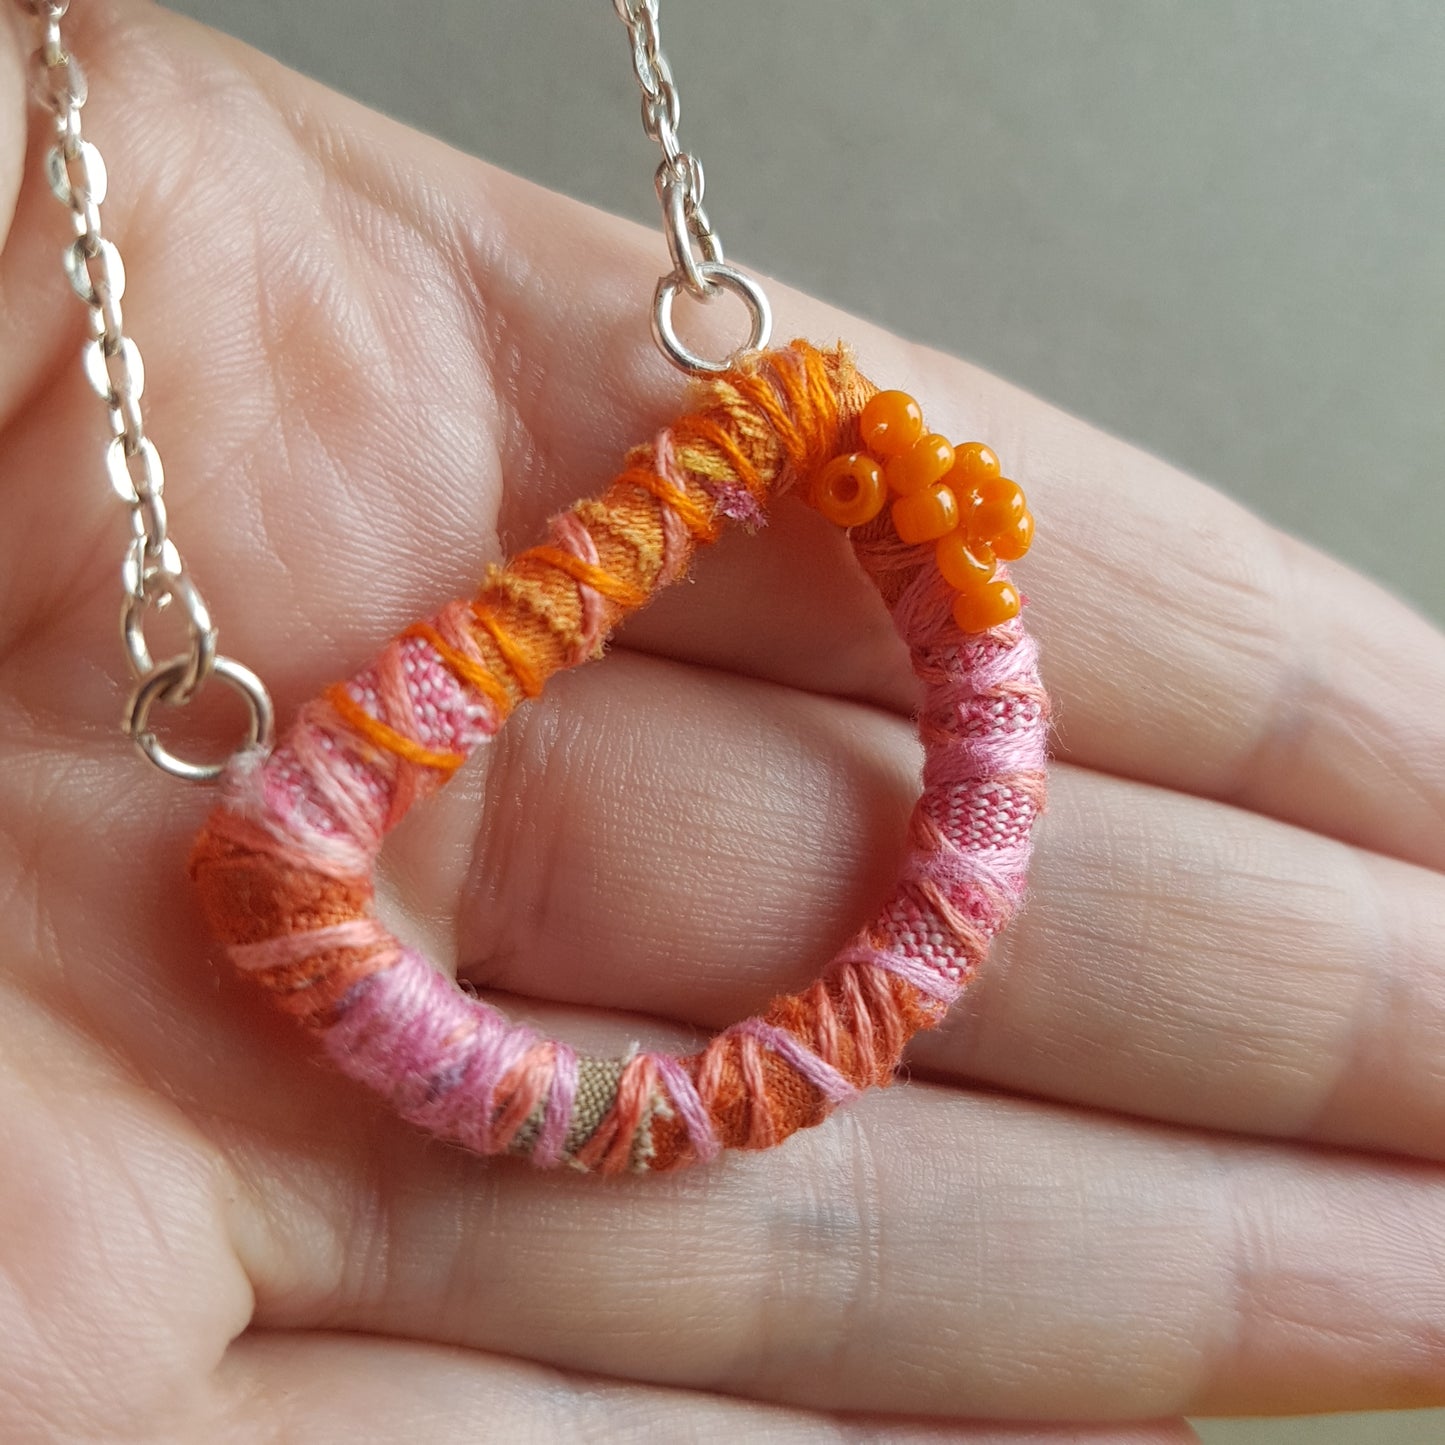 Hand holding a pink and orange textile art necklace with a silver plated chain.